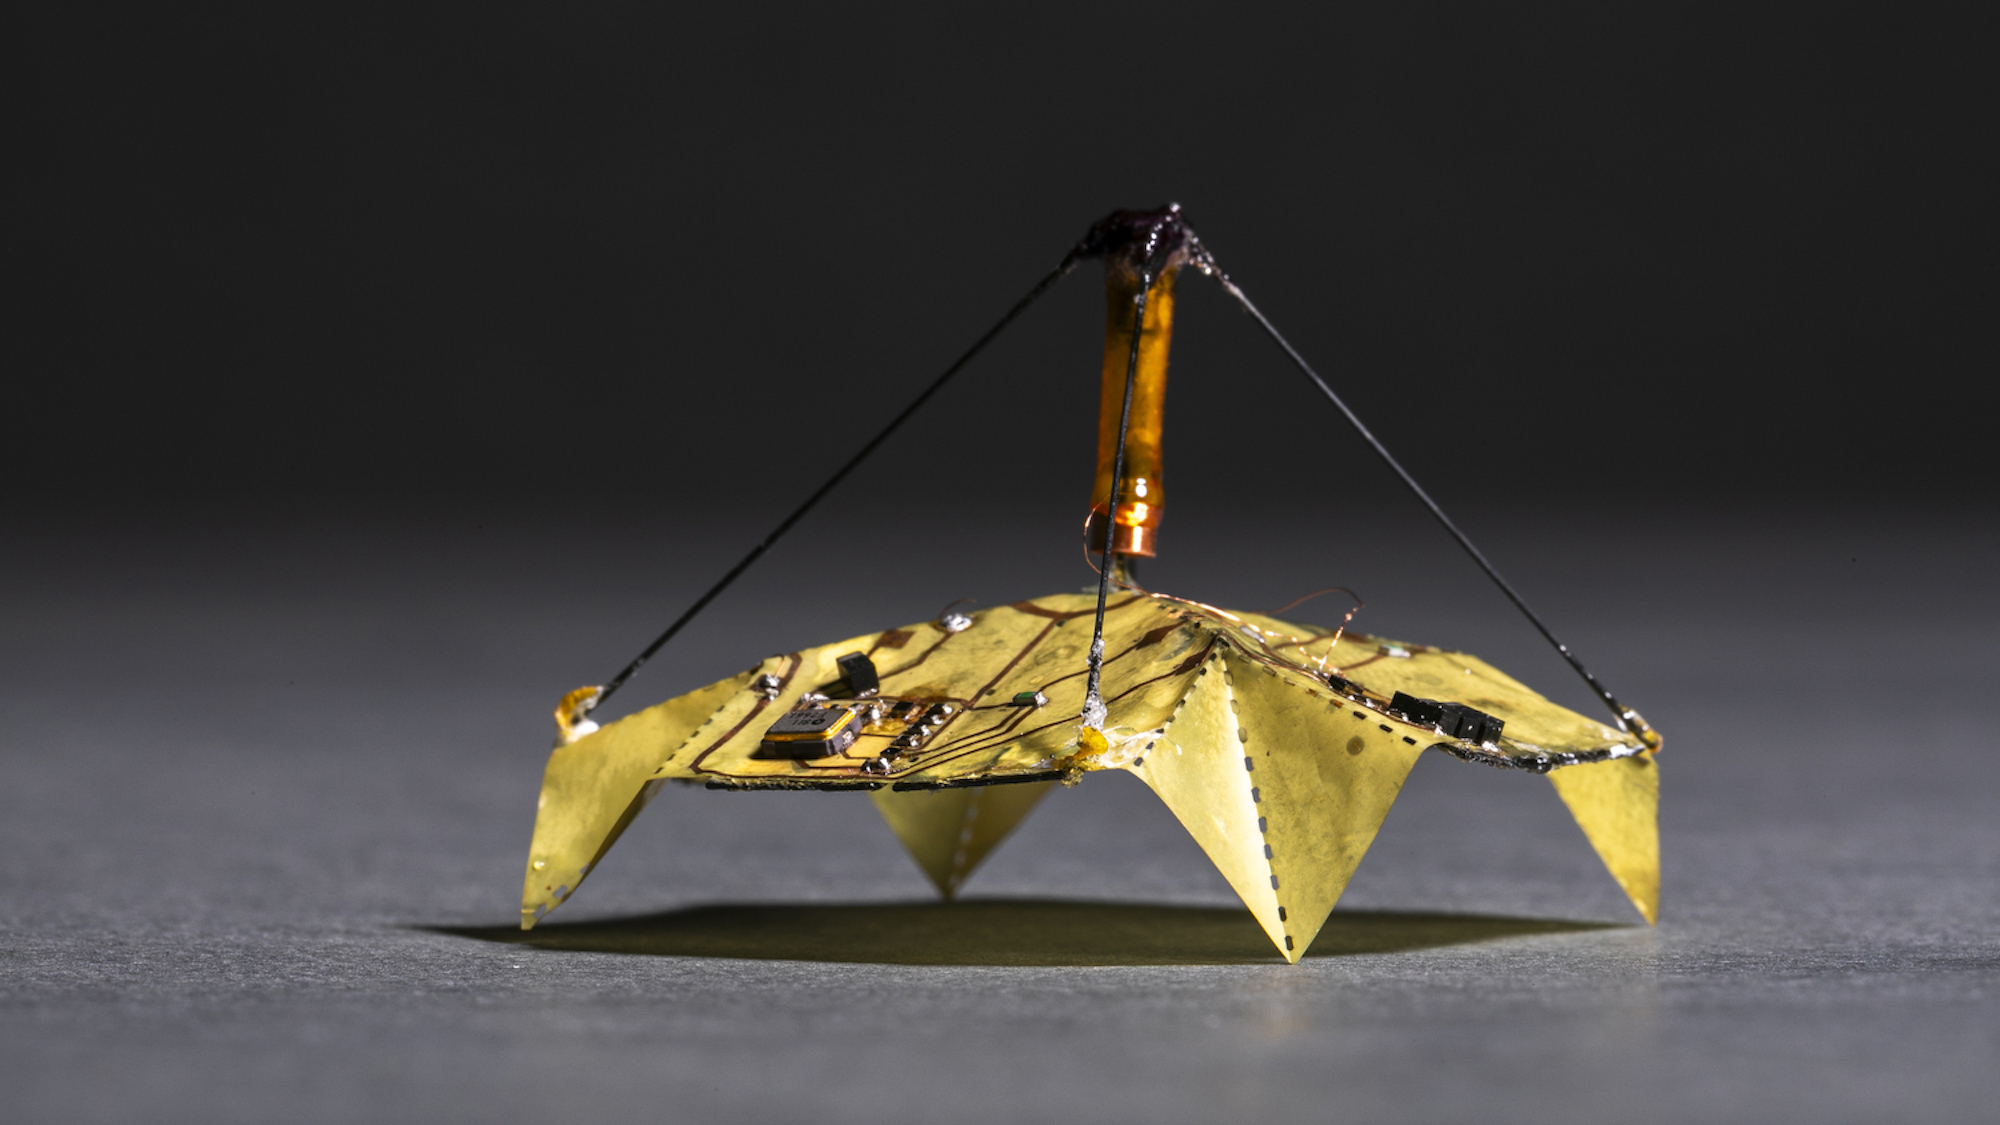 Microbots fold like origami to control their descent